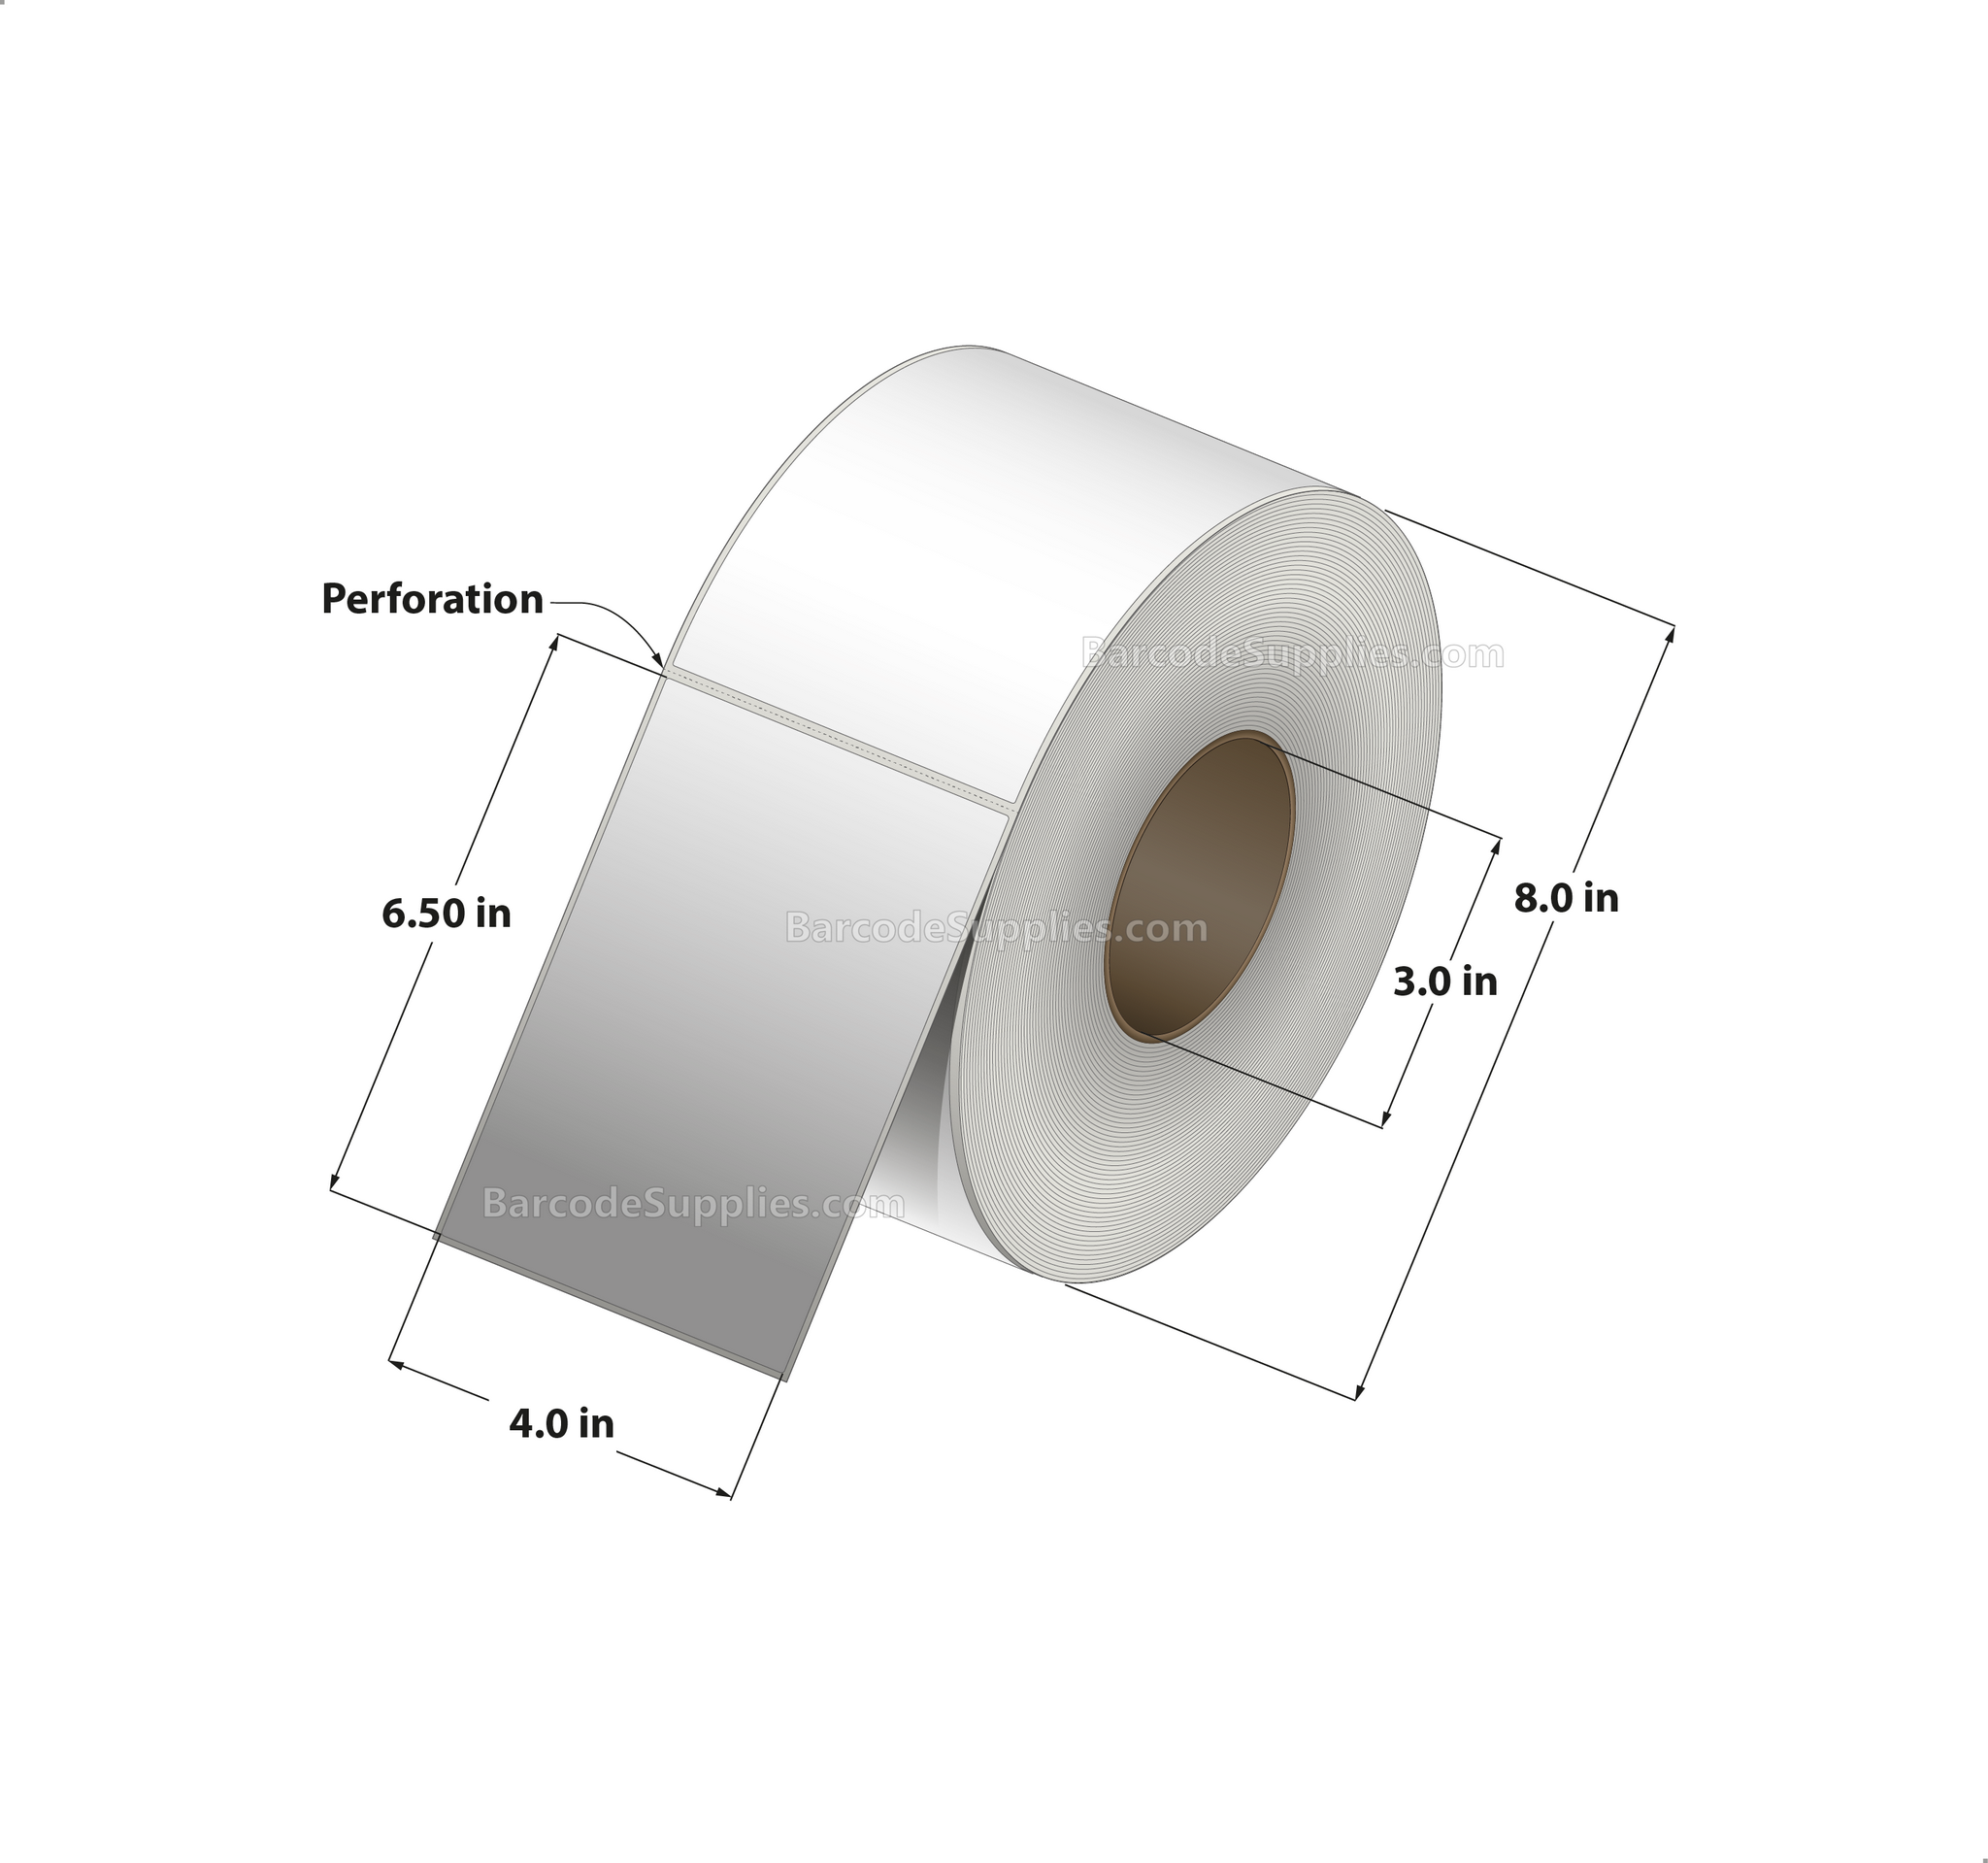 4 x 6.5 Direct Thermal White Labels With Permanent Acrylic Adhesive - Perforated - 900 Labels Per Roll - Carton Of 4 Rolls - 3600 Labels Total - MPN: DT465-1P